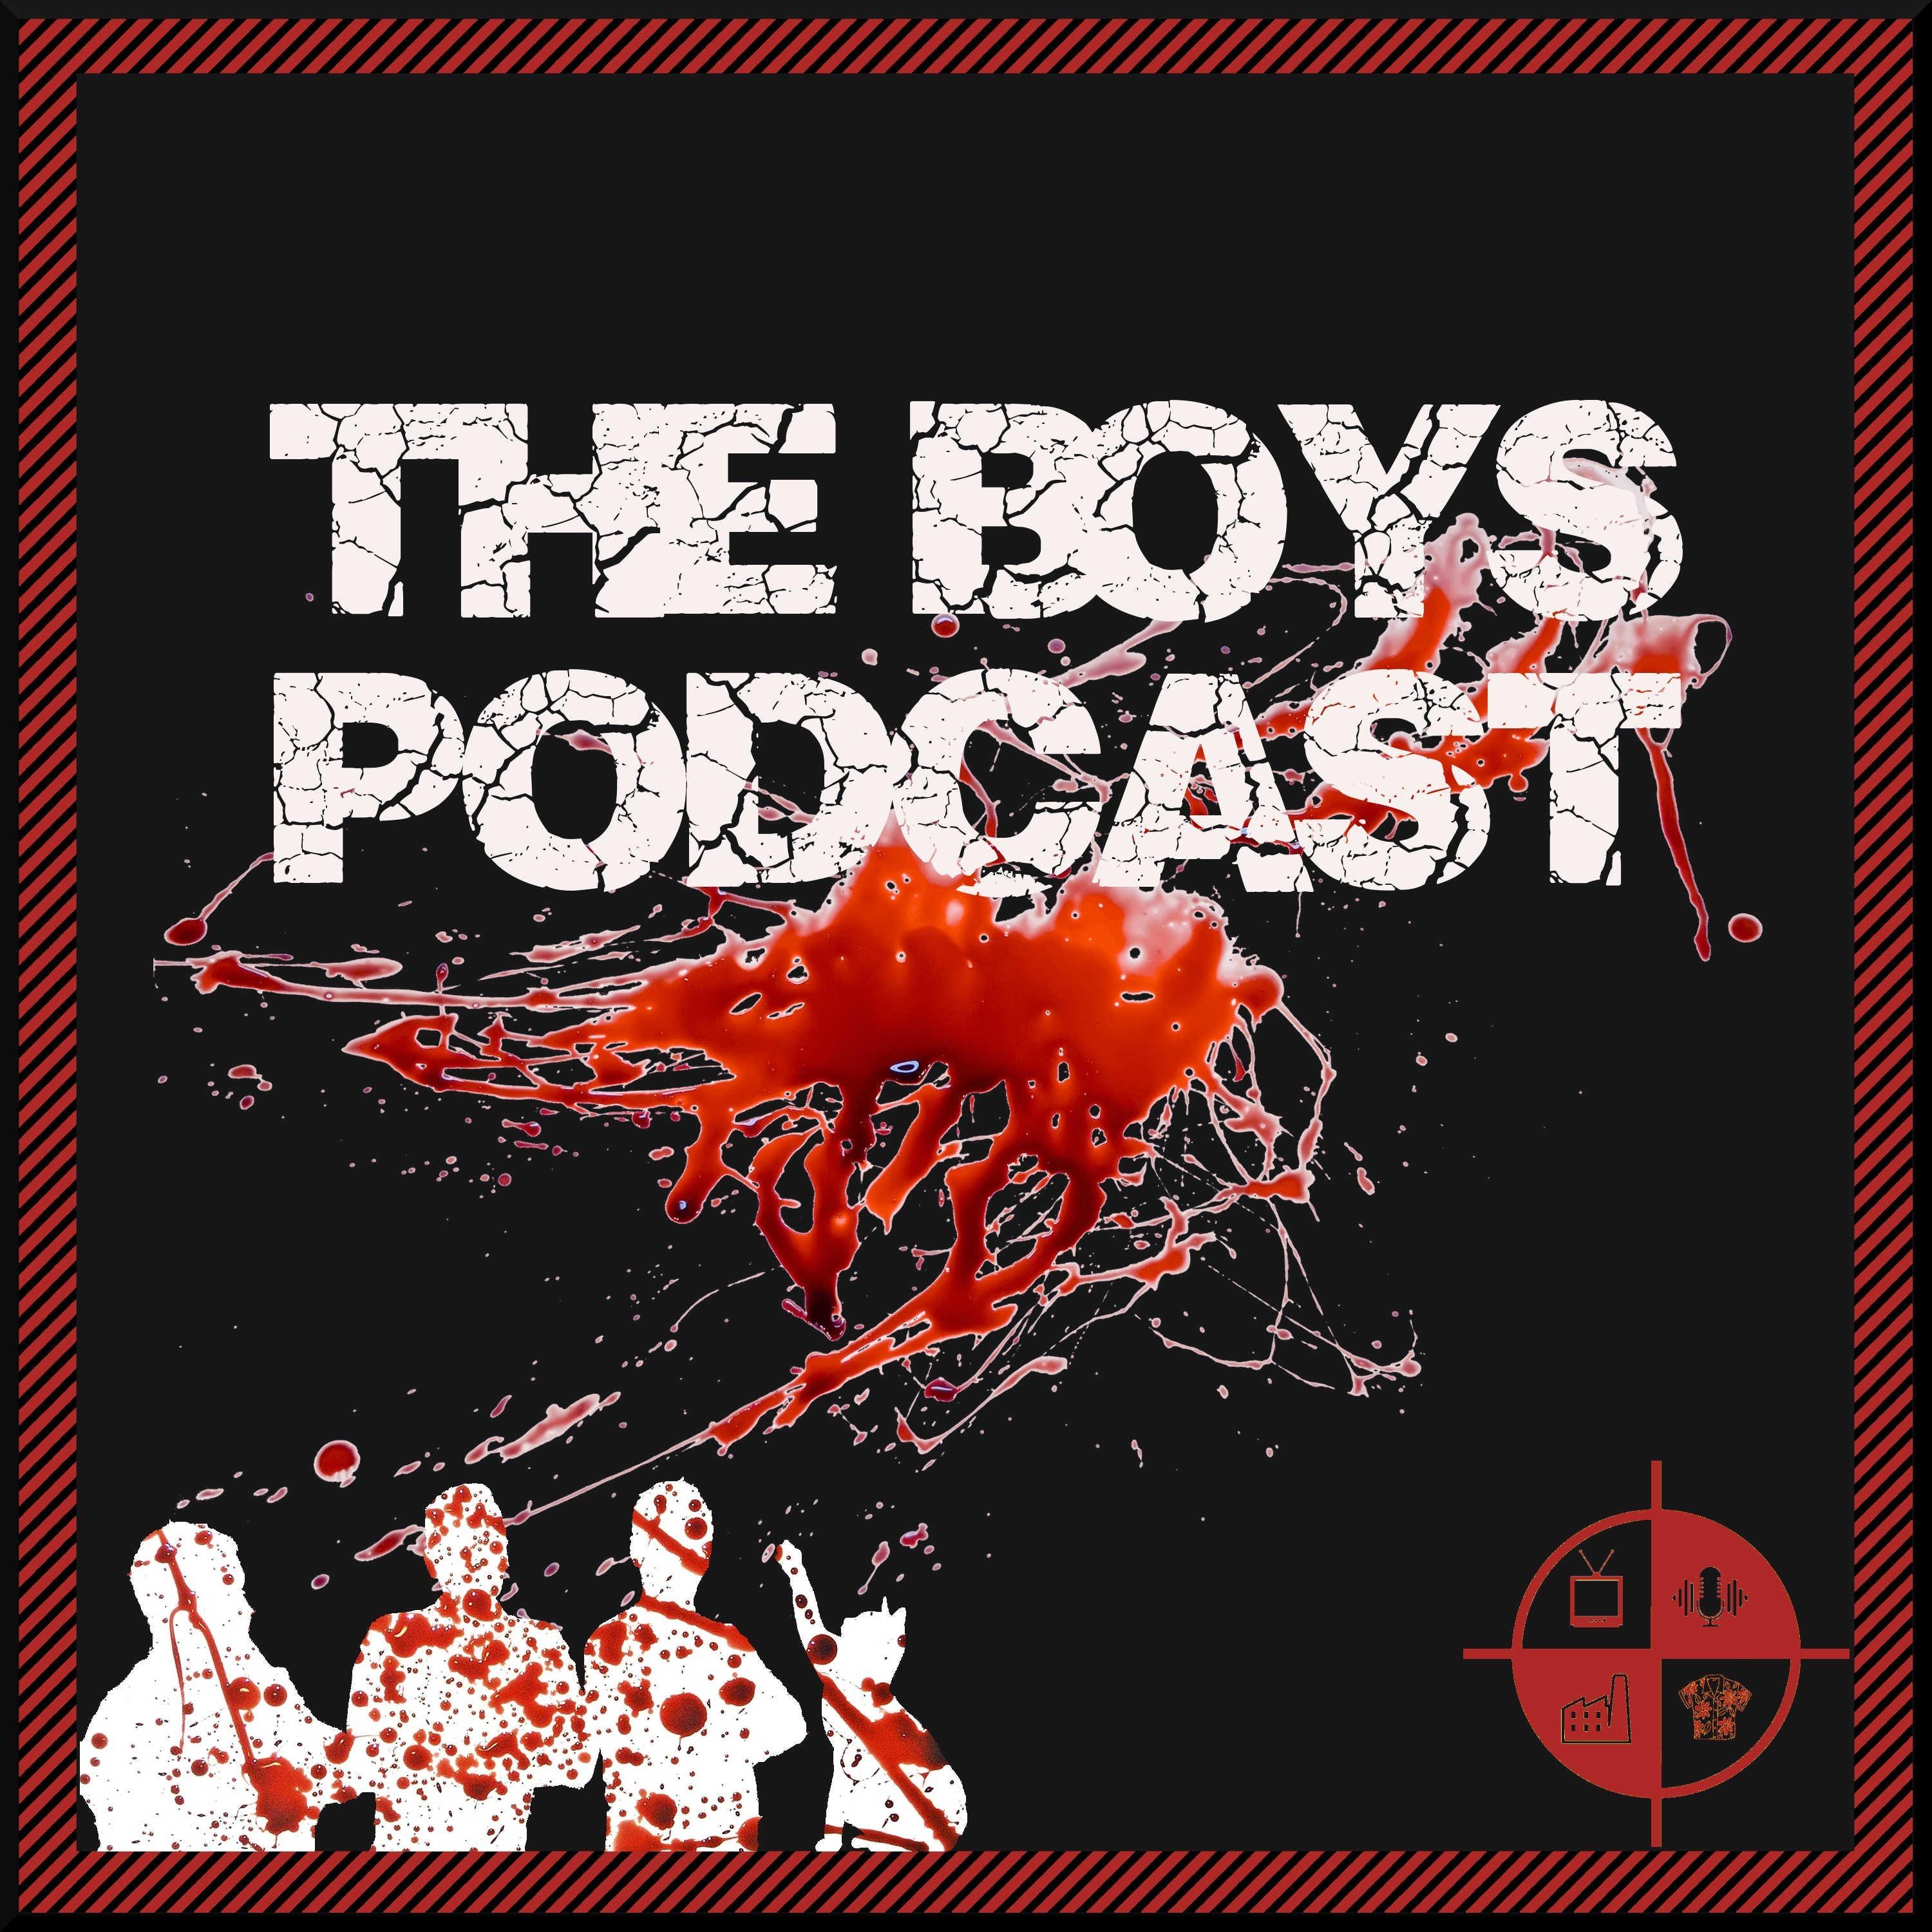 The Boys TV Podcast from TV Podcast Industries